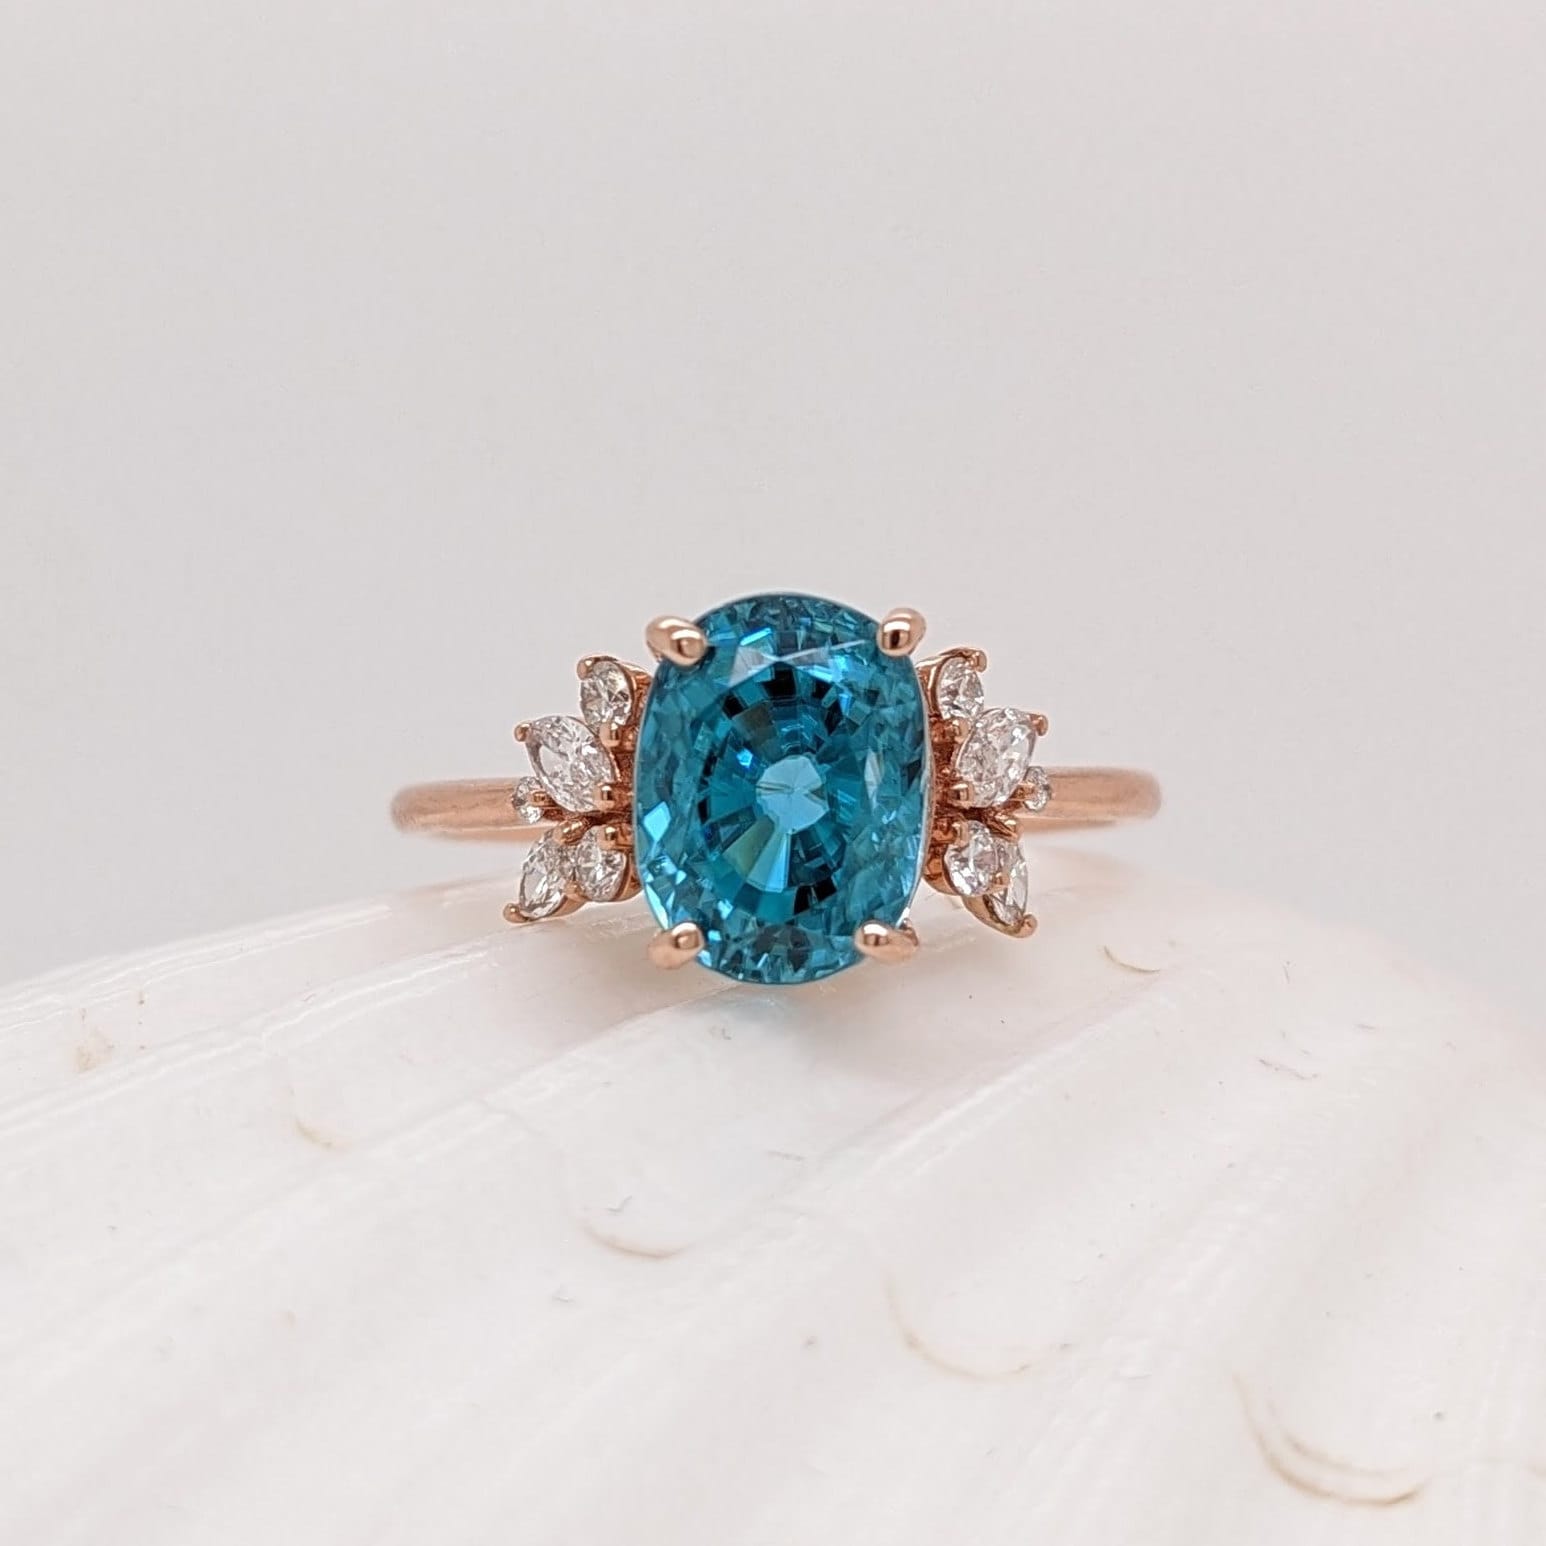 Beautiful Natural Blue Zircon Ring in 14K Gold w Natural Diamond Accent Halo | Oval 9x7mm | Nature Themed | December Birthstone |